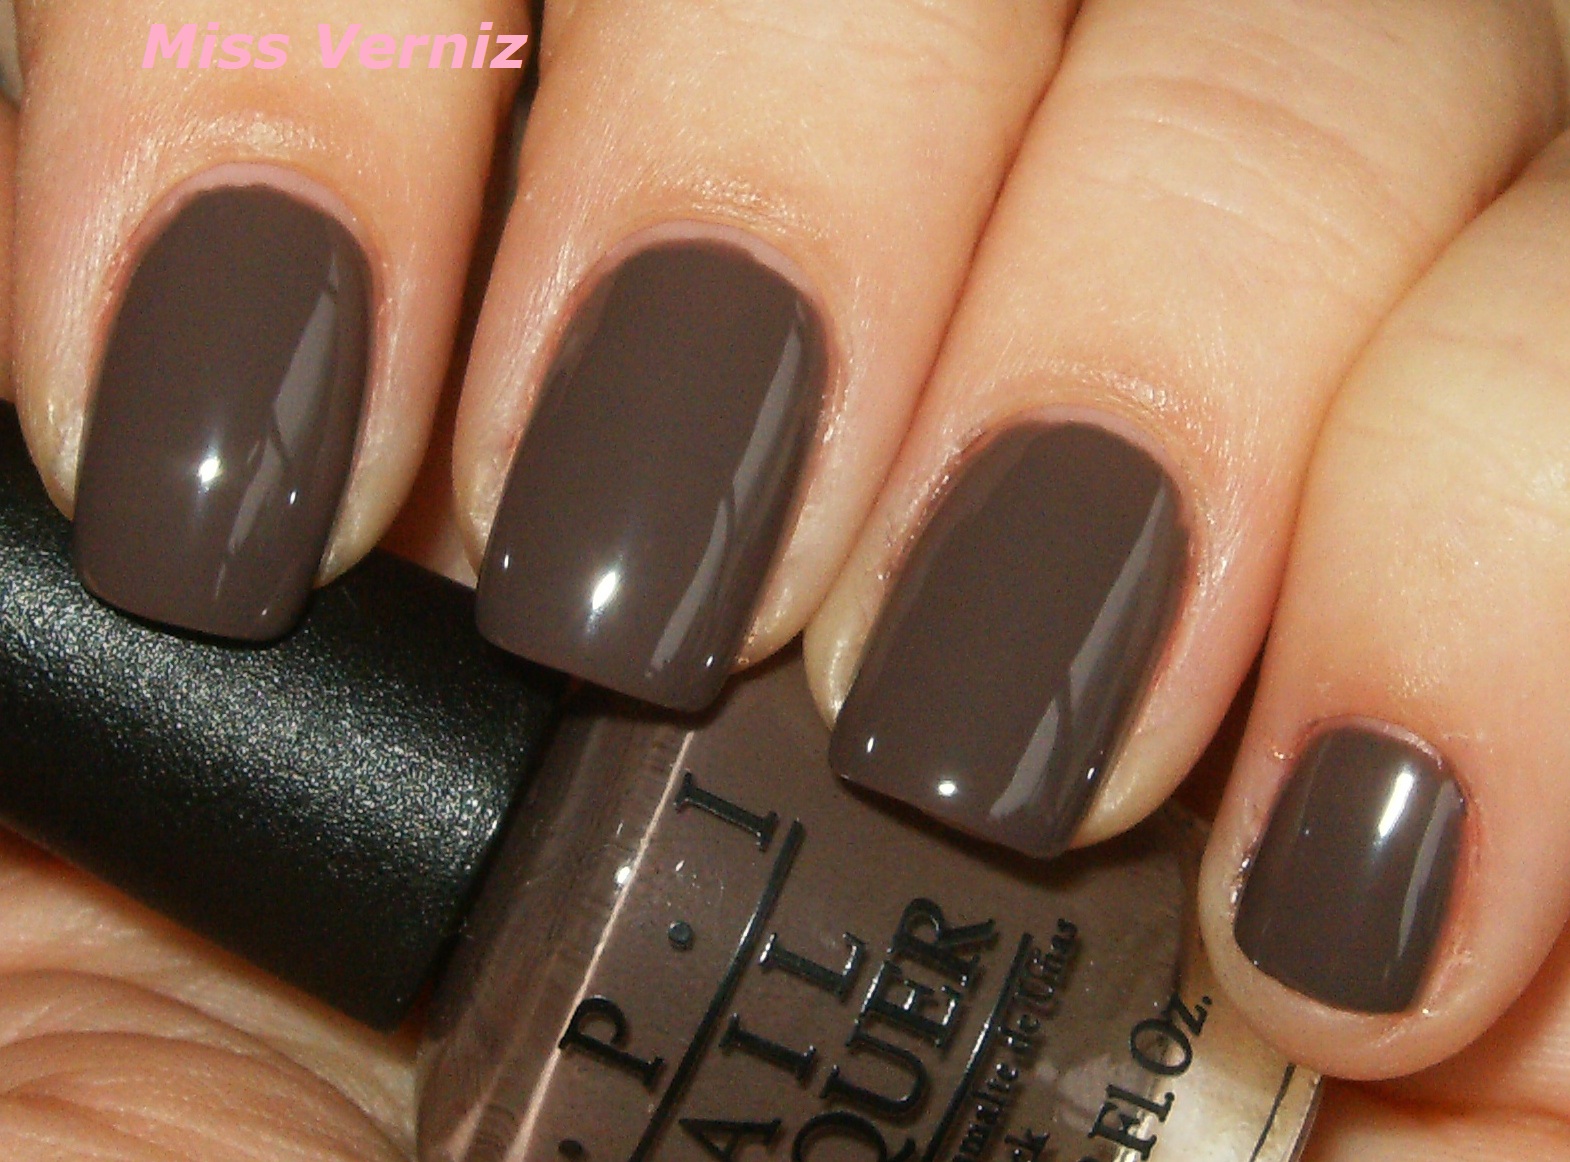 6. OPI Nail Lacquer in "You Don't Know Jacques!" - wide 3